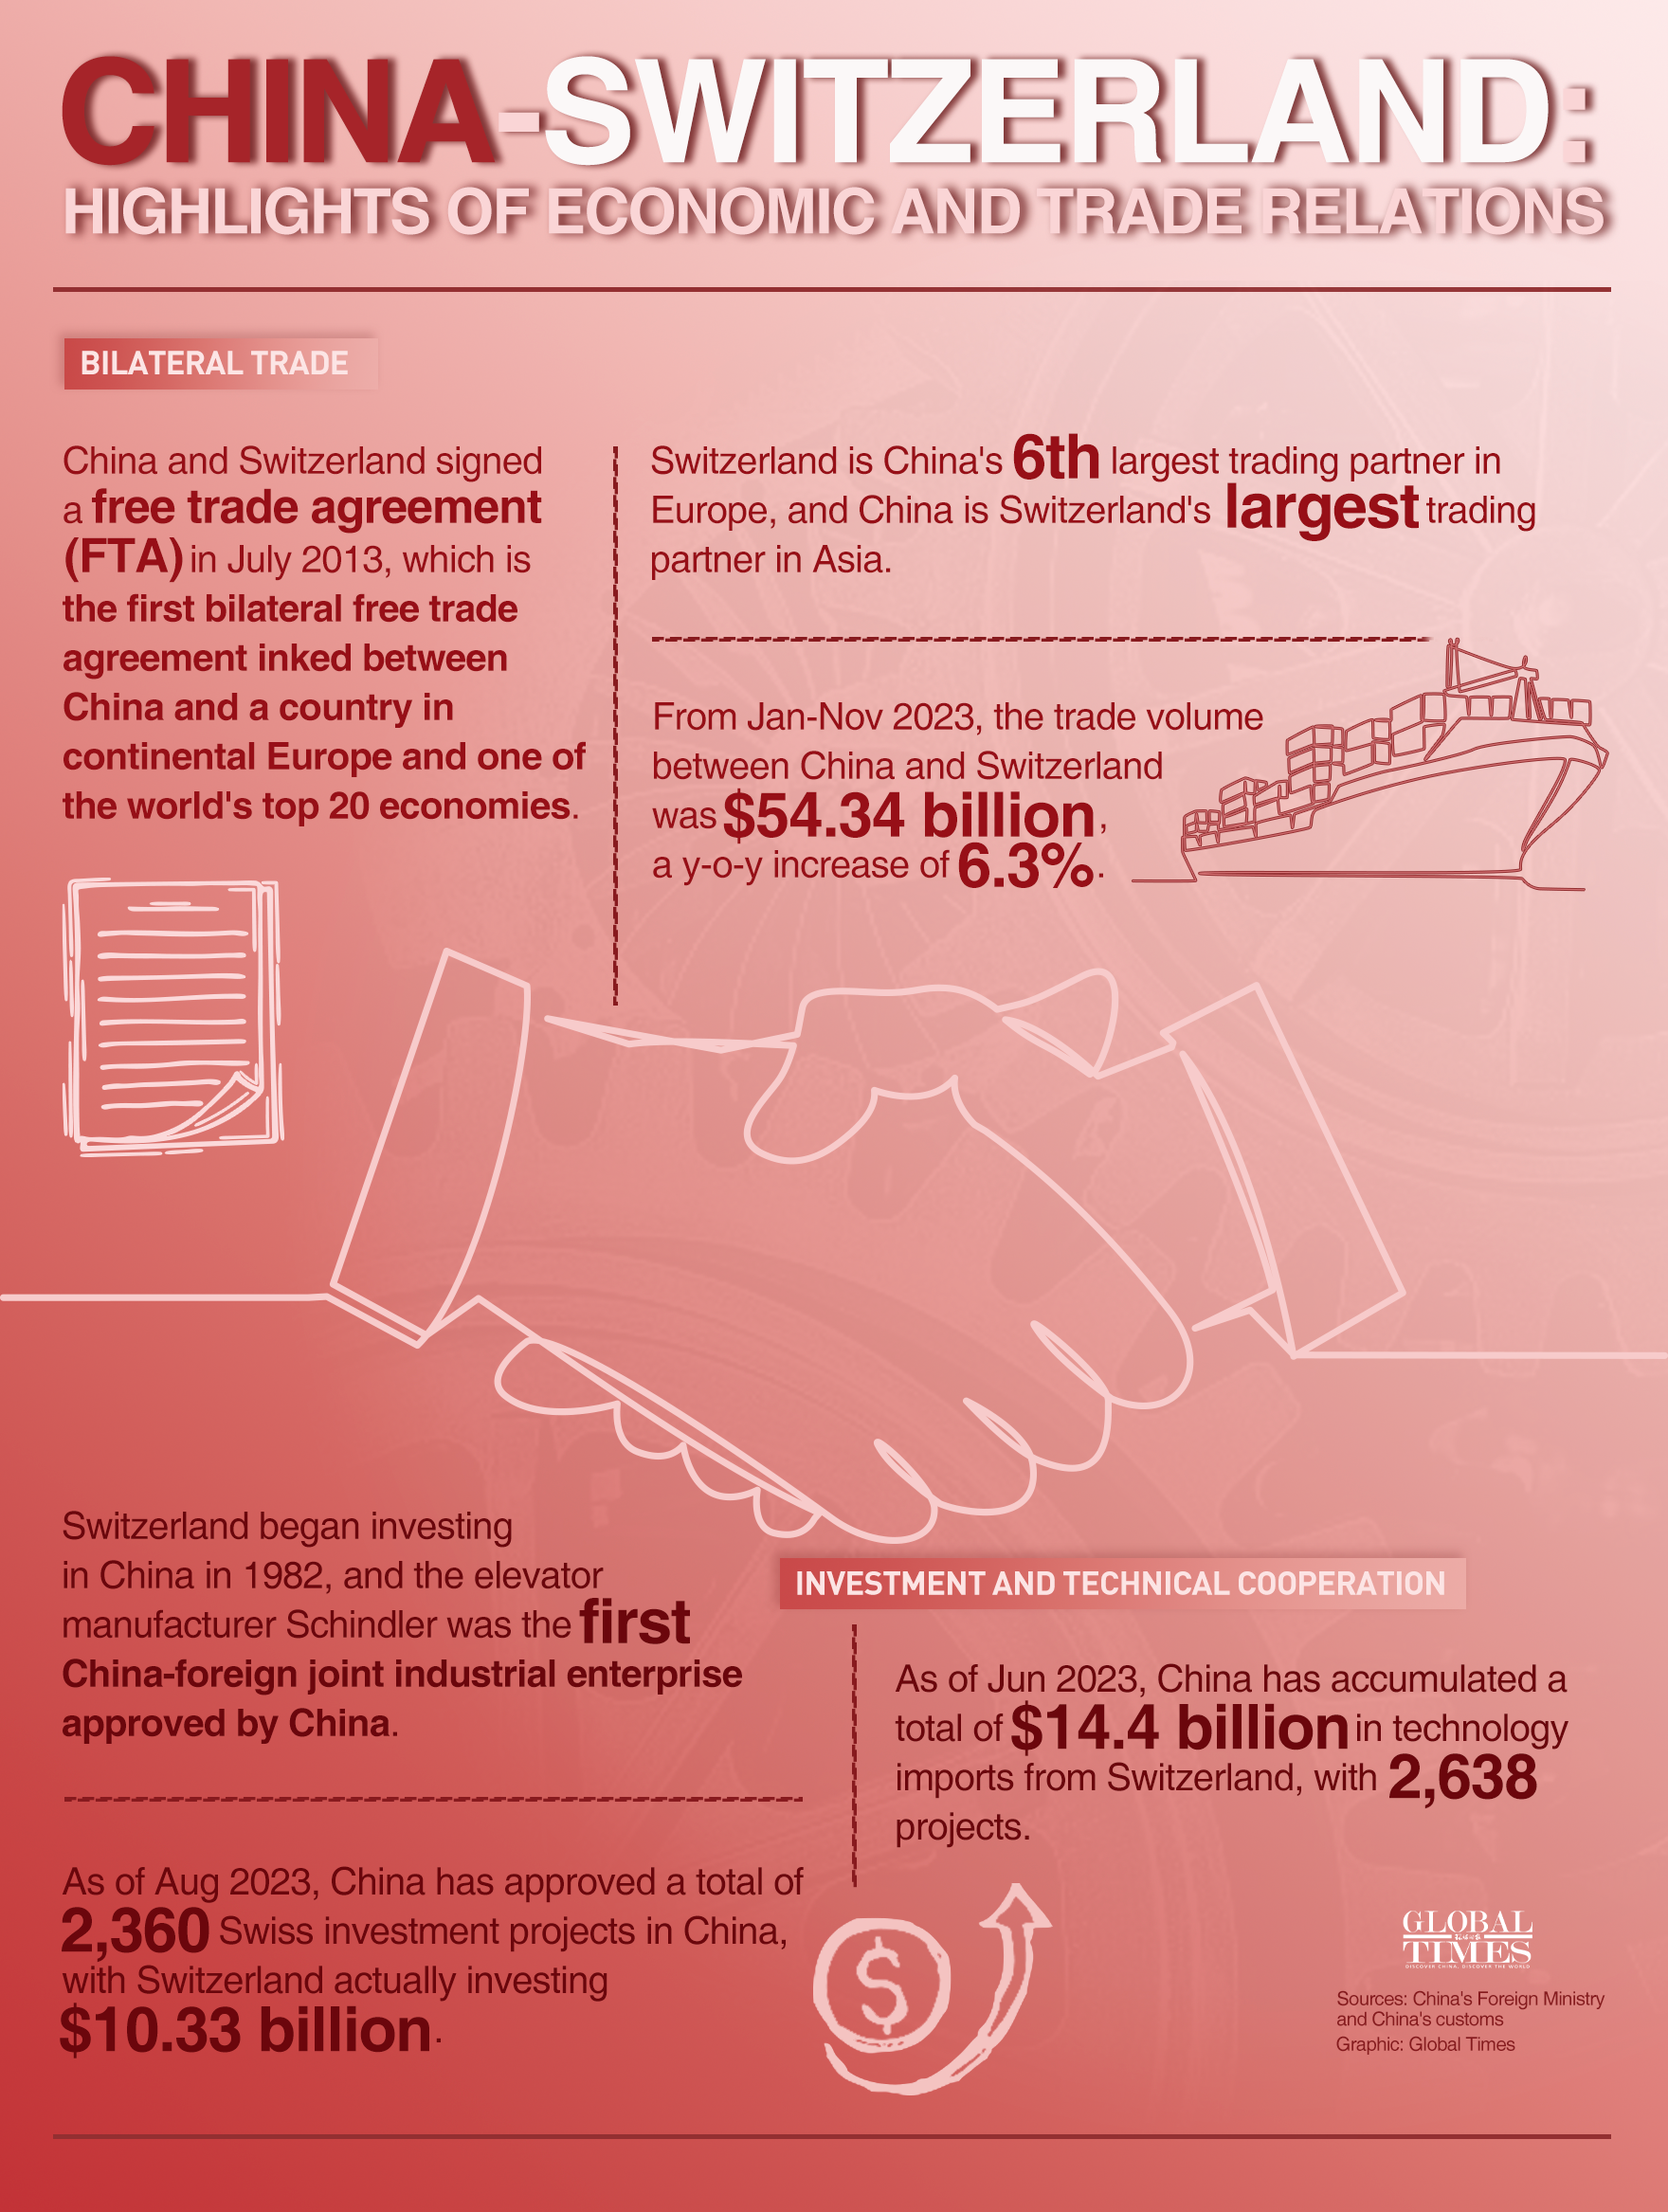 China-Switzerland: Highlights of economic and trade relations. Graphic: GT